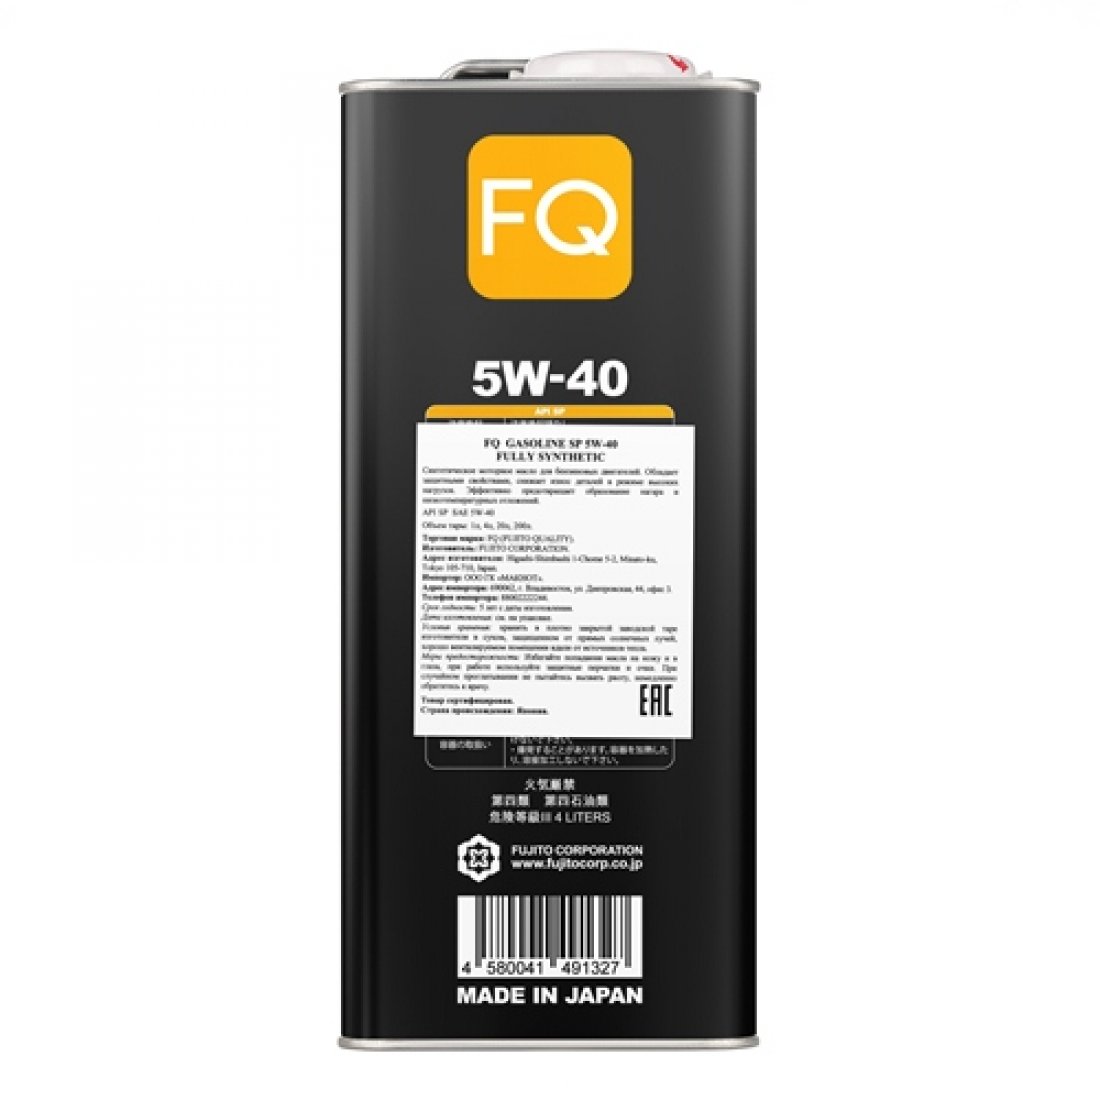 Масло fq 5w30. FQ fully Synthetic SP/gf-6a 5w-30. Масло FQ 5w30 синтетика. FQ 5w30 SP/gf-6а.